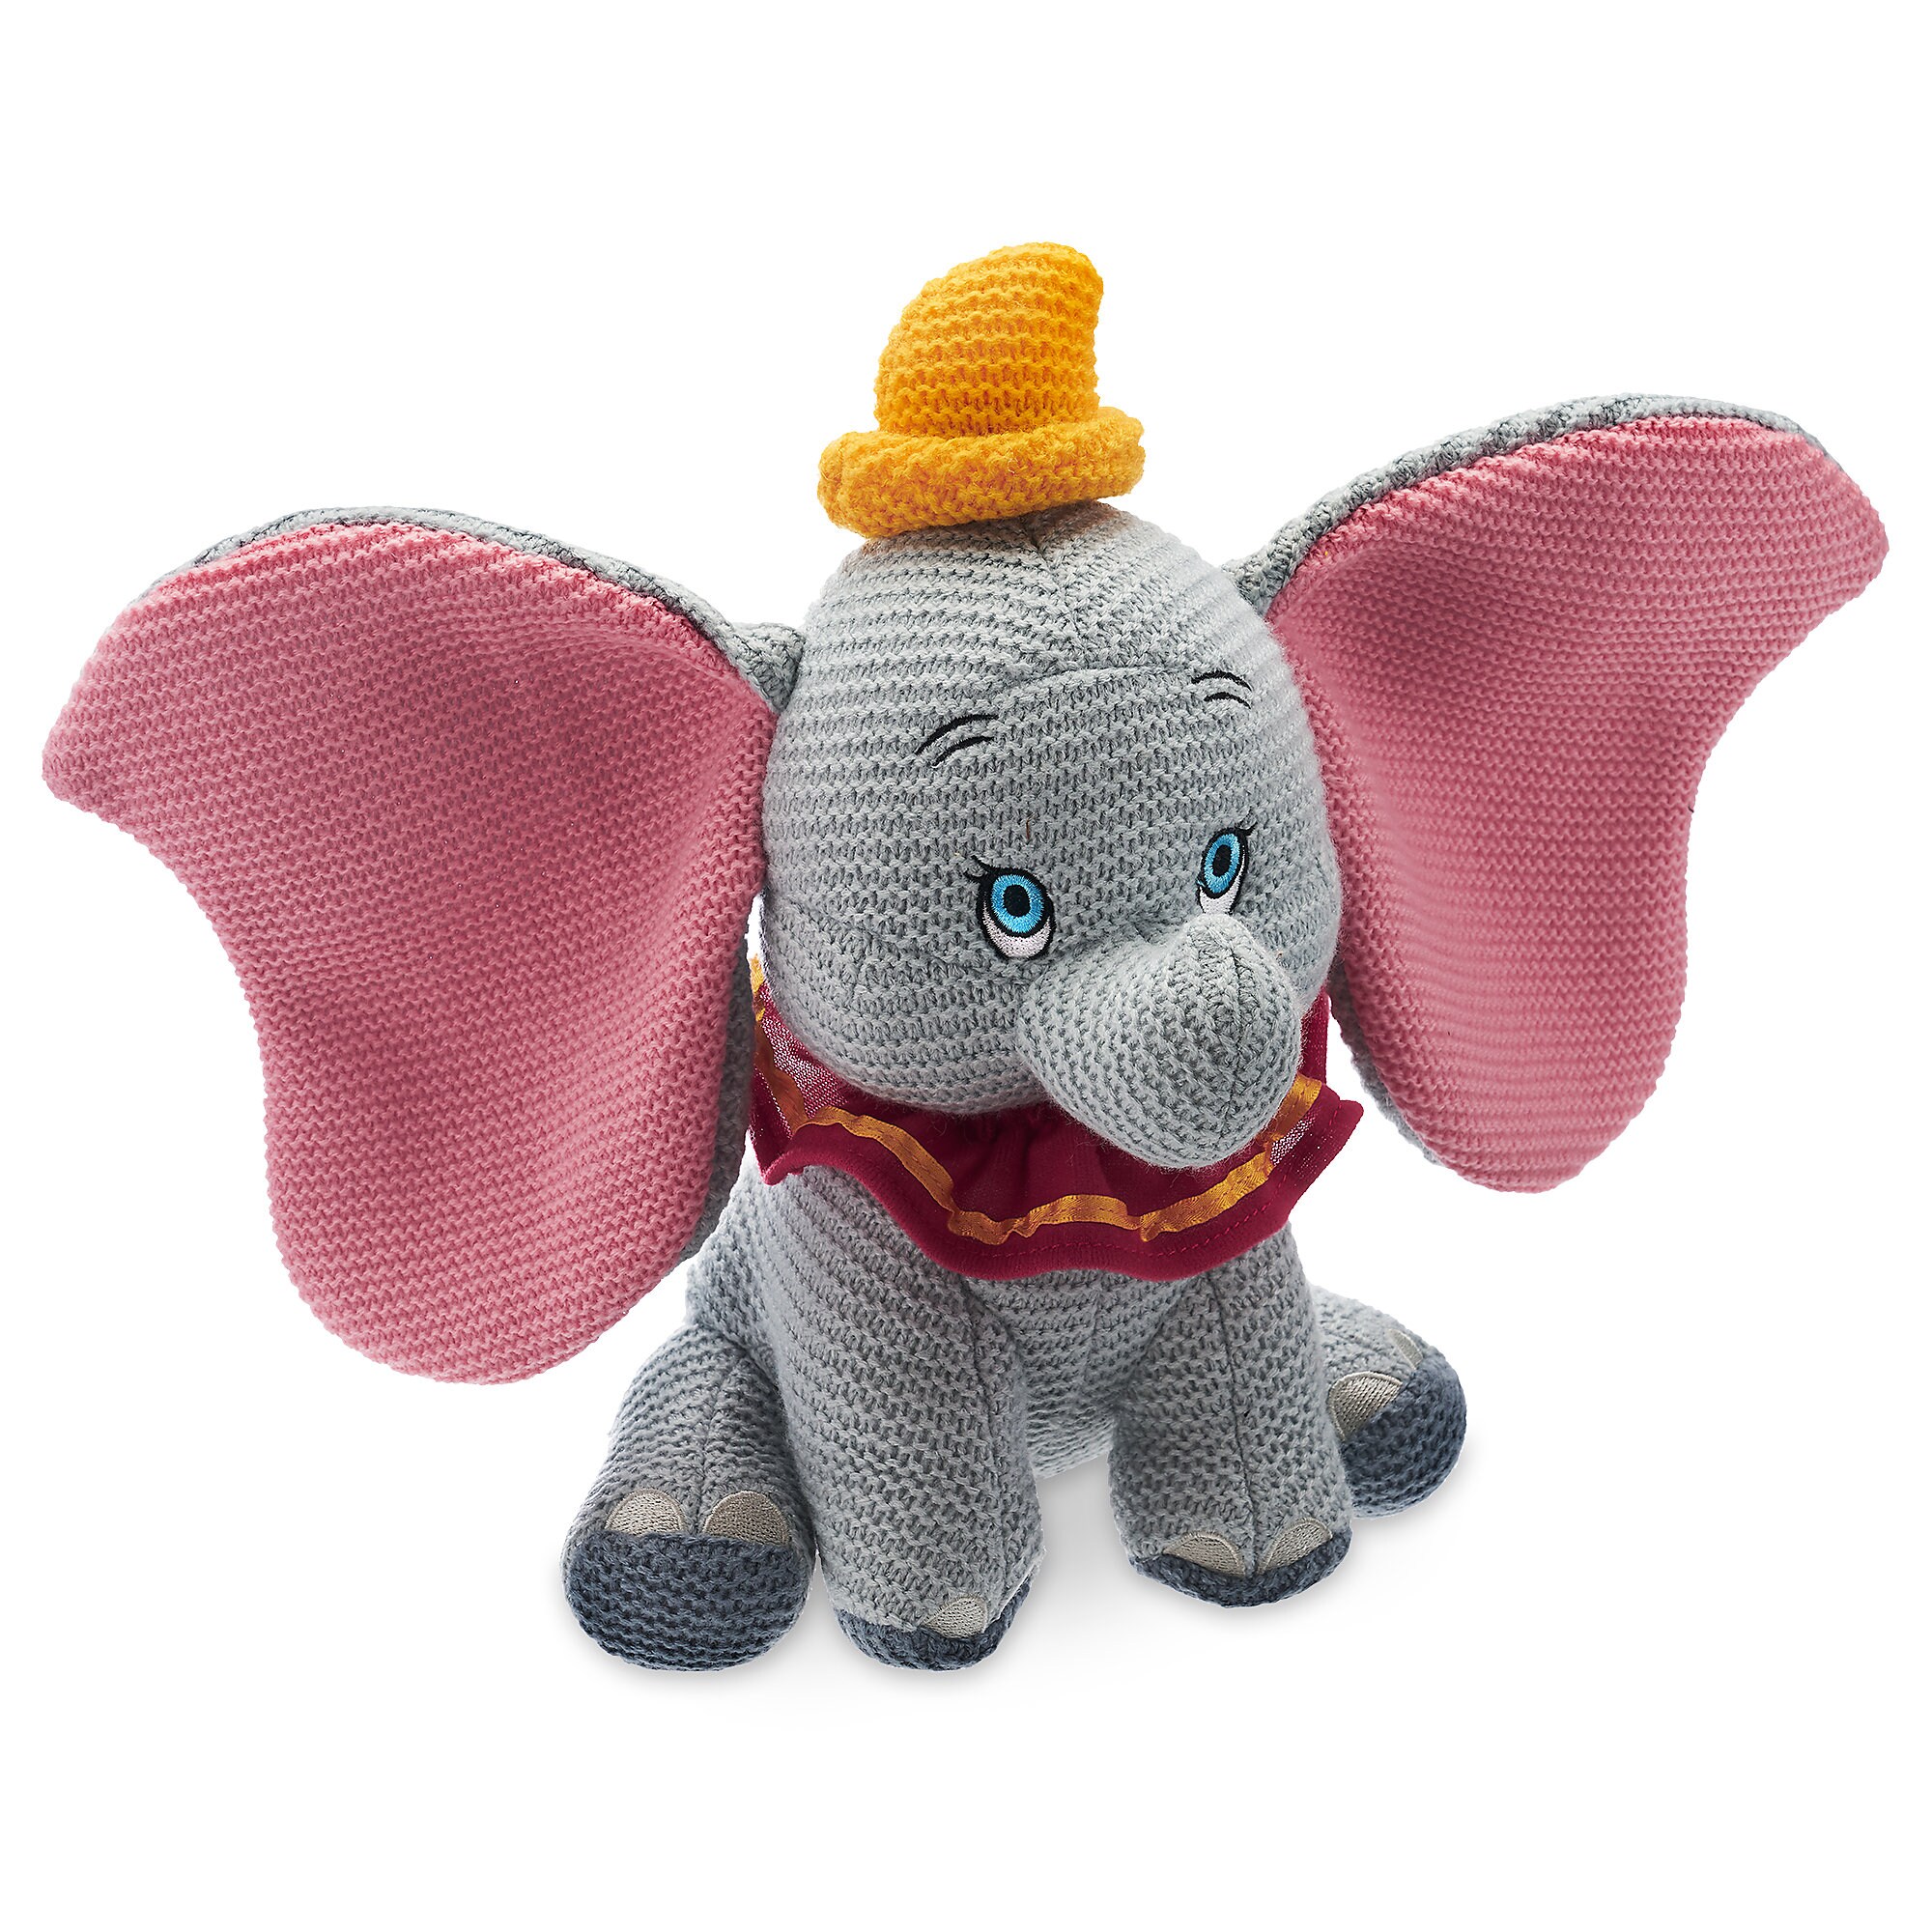 Dumbo Knit Plush - 11'' - Limited Release